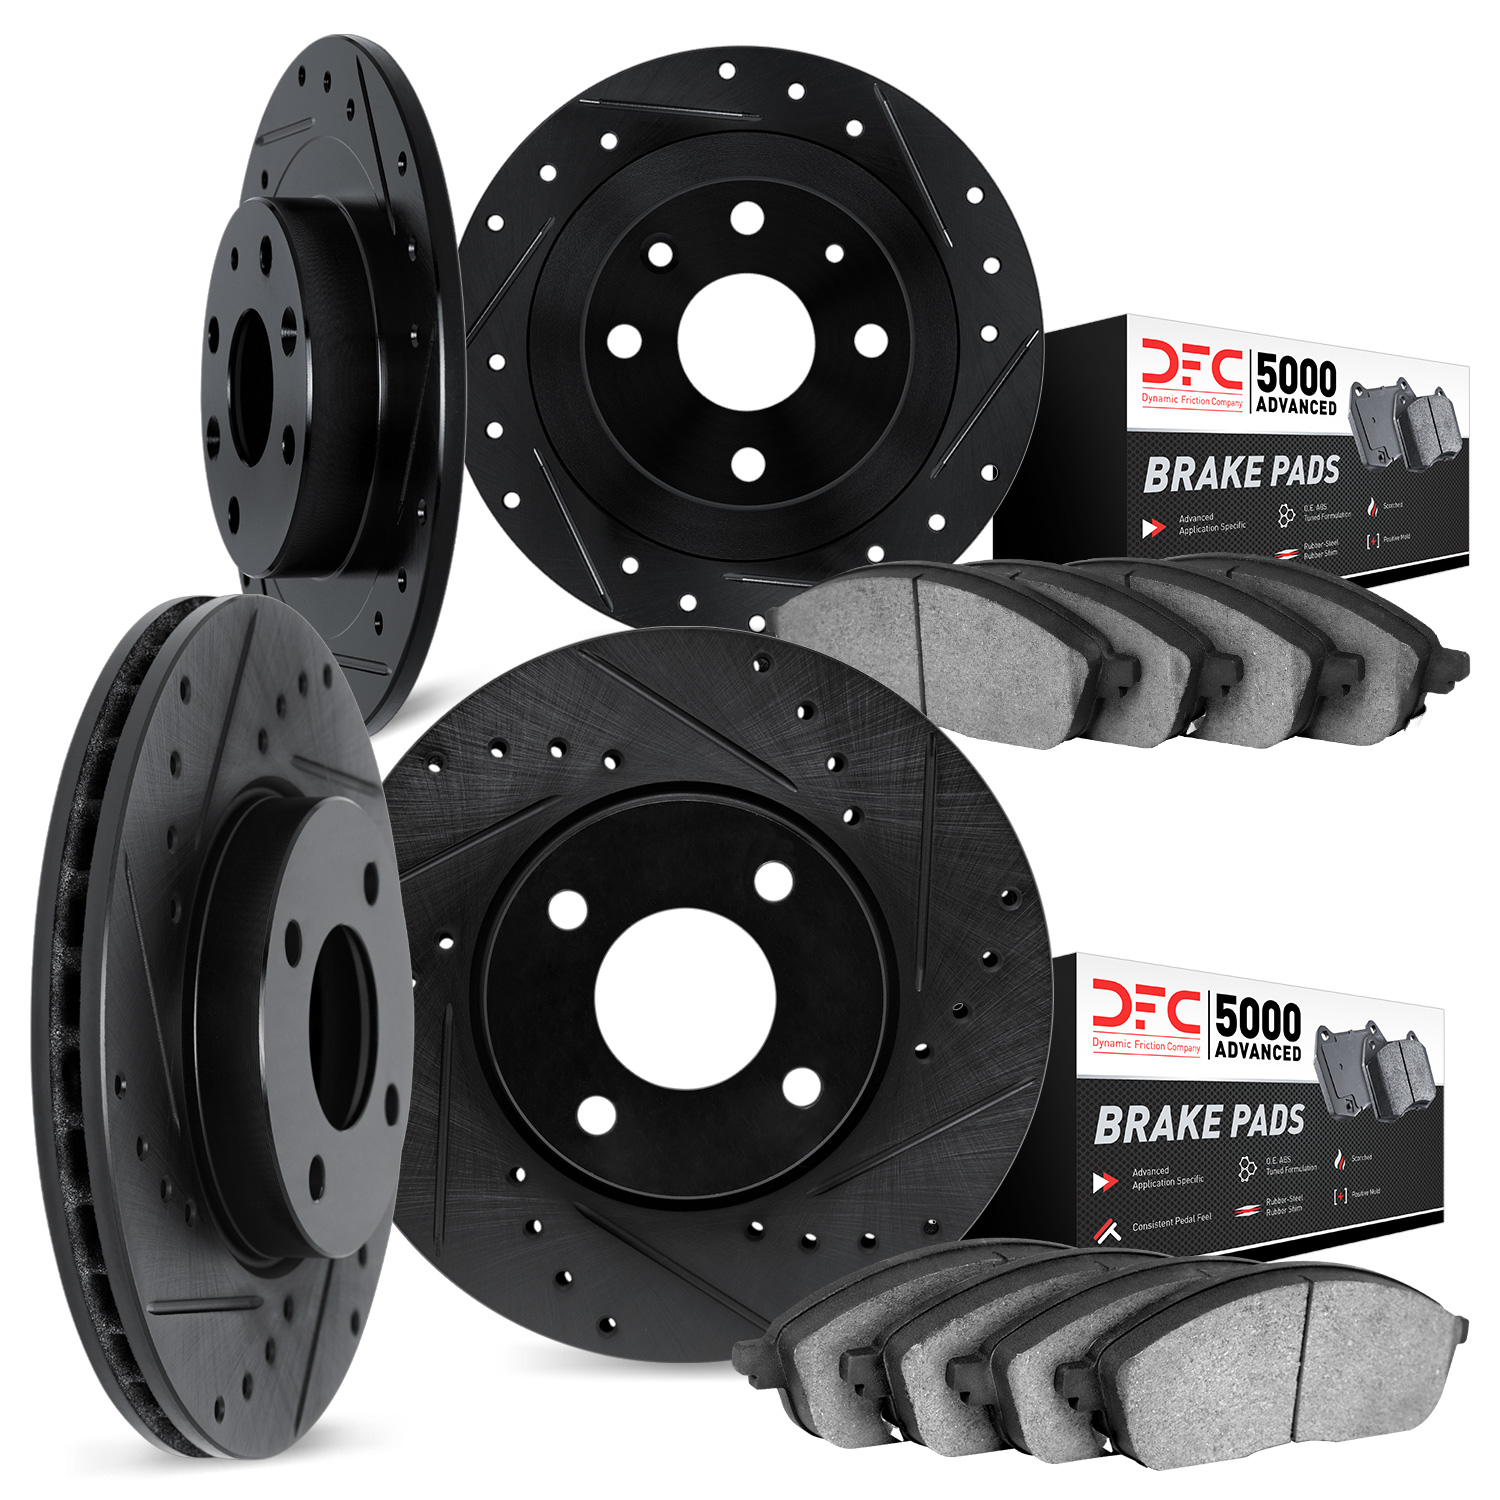 8504-67092 Drilled/Slotted Brake Rotors w/5000 Advanced Brake Pads Kit [Black], 1991-1994 Infiniti/Nissan, Position: Front and R